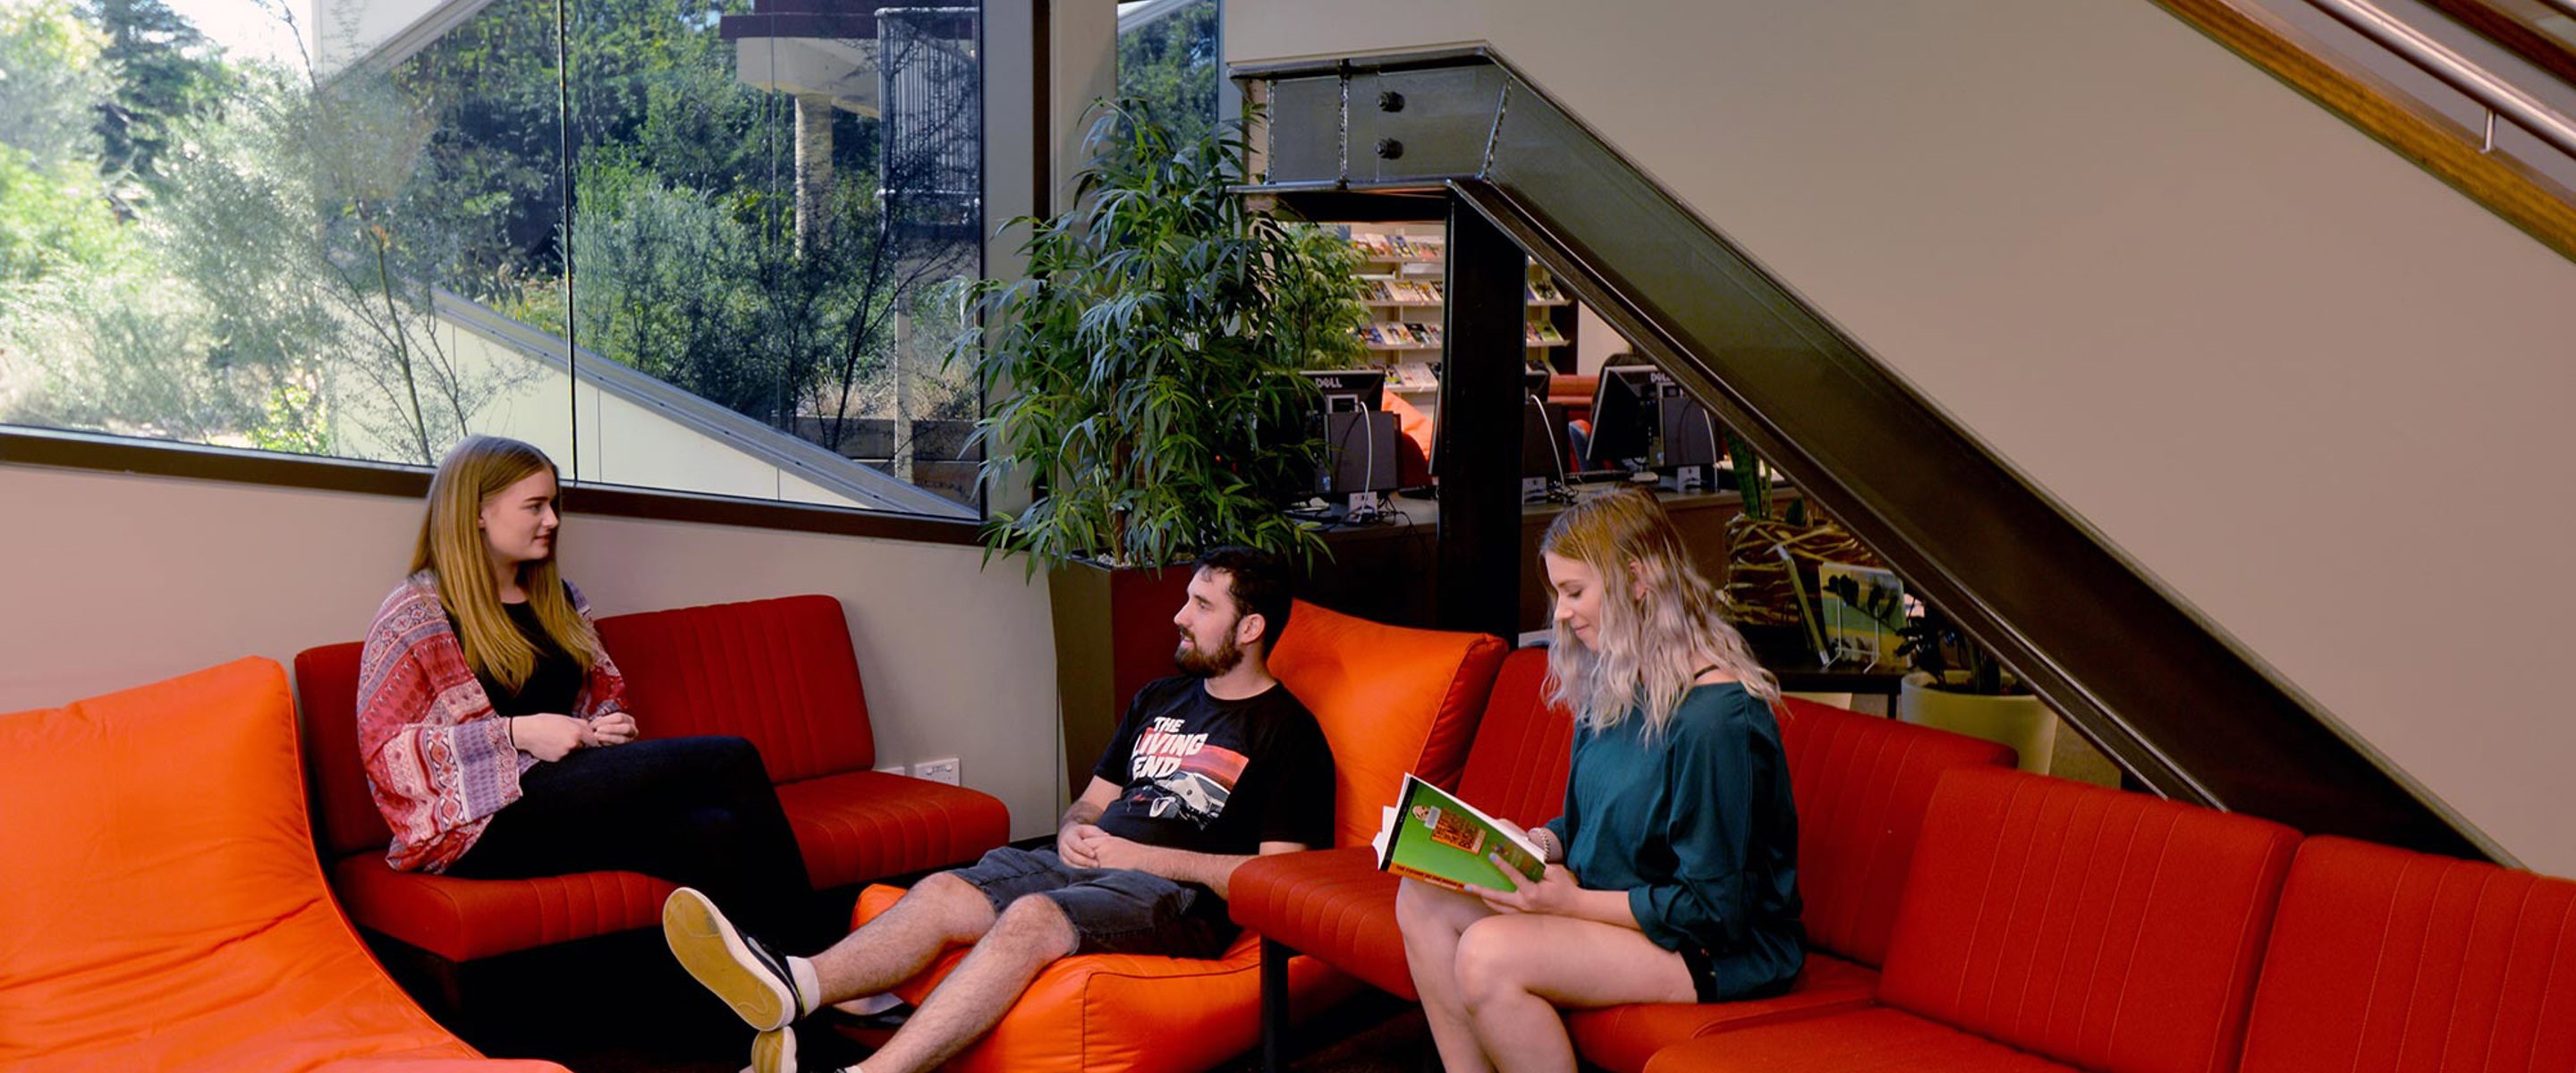 Students relax at Melbourne Polytechnic's Fairfield Library